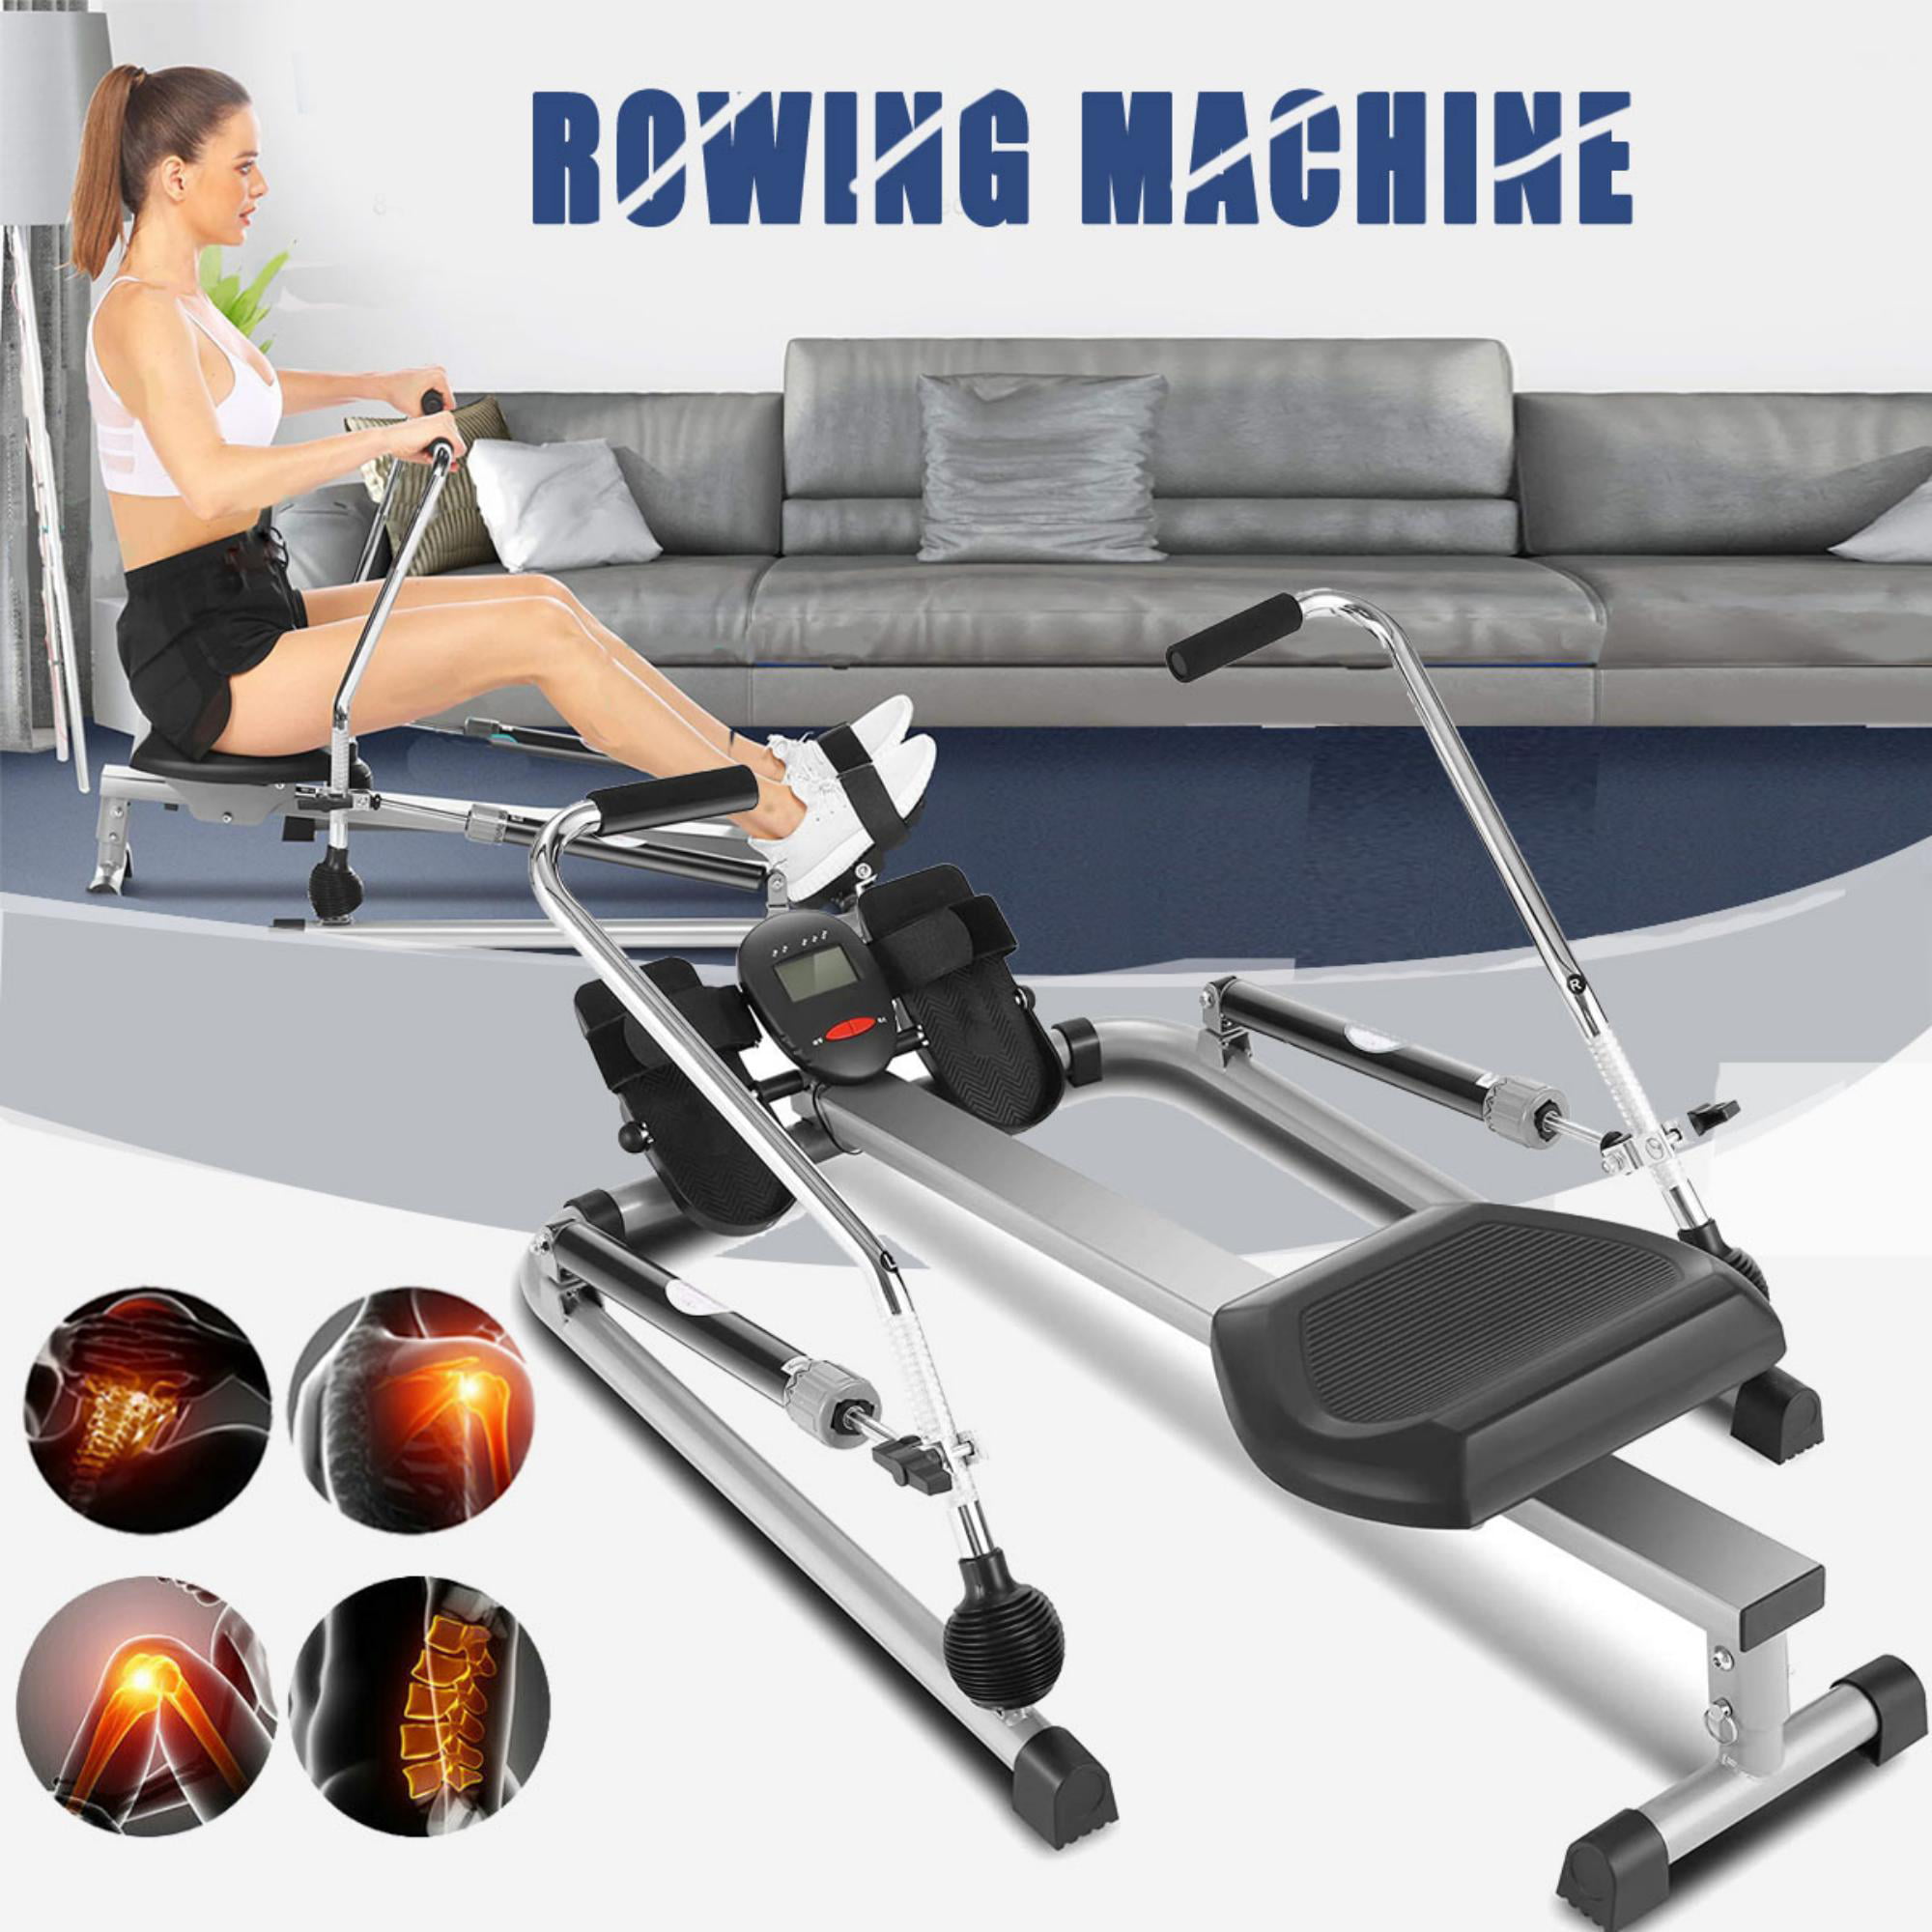 Advanced Driving Belt System 8-Level Adjustable Resistance Transport Wheels Magnetic Resistance Rowing Machine with Foldable Design Takefuns Indoor home rowing machine//Rower